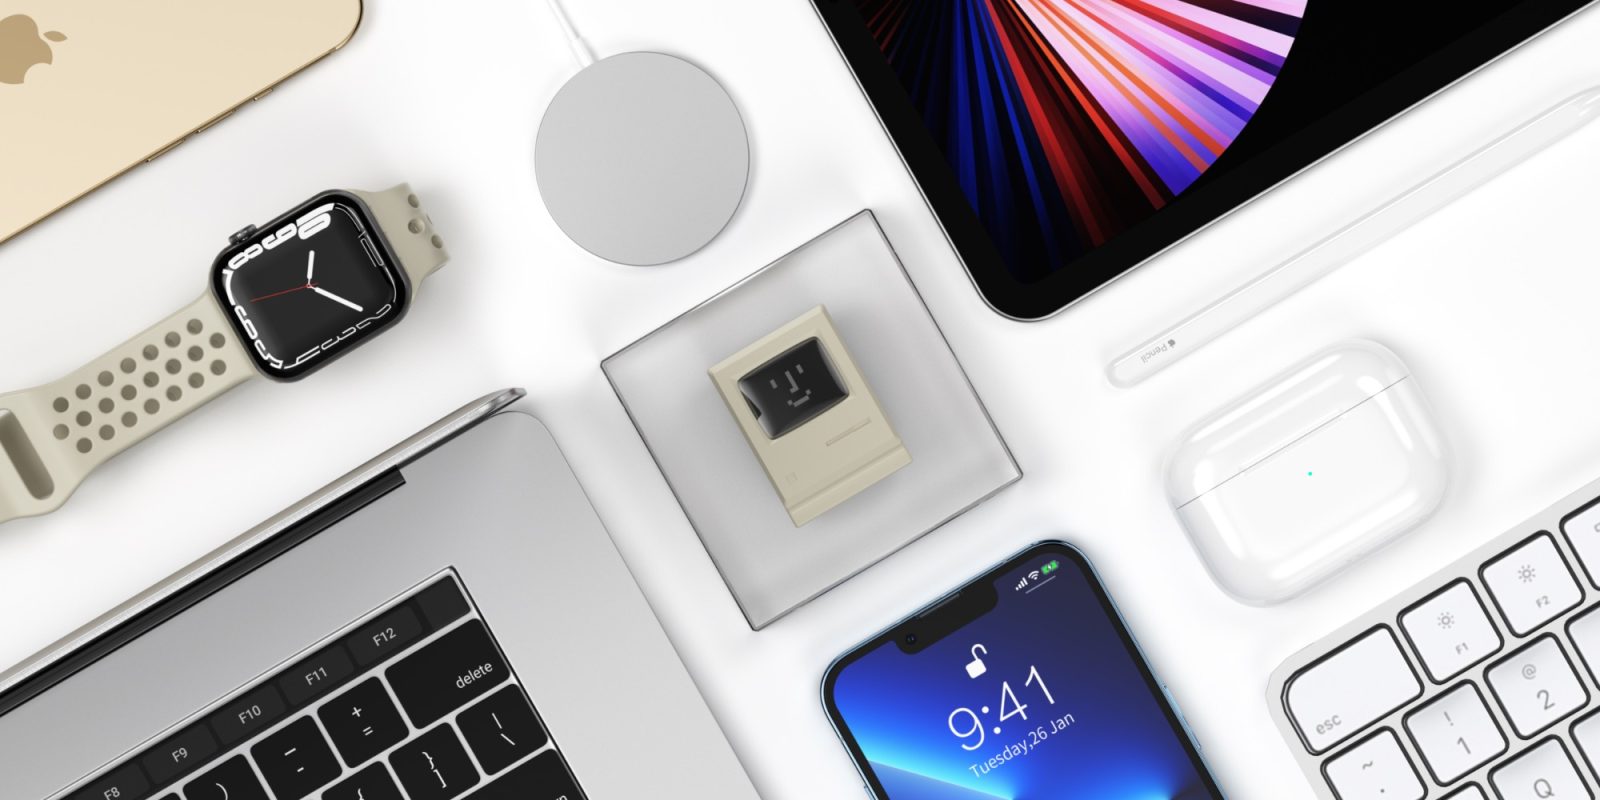 Power your iPhone with this tiny light-up Macintosh